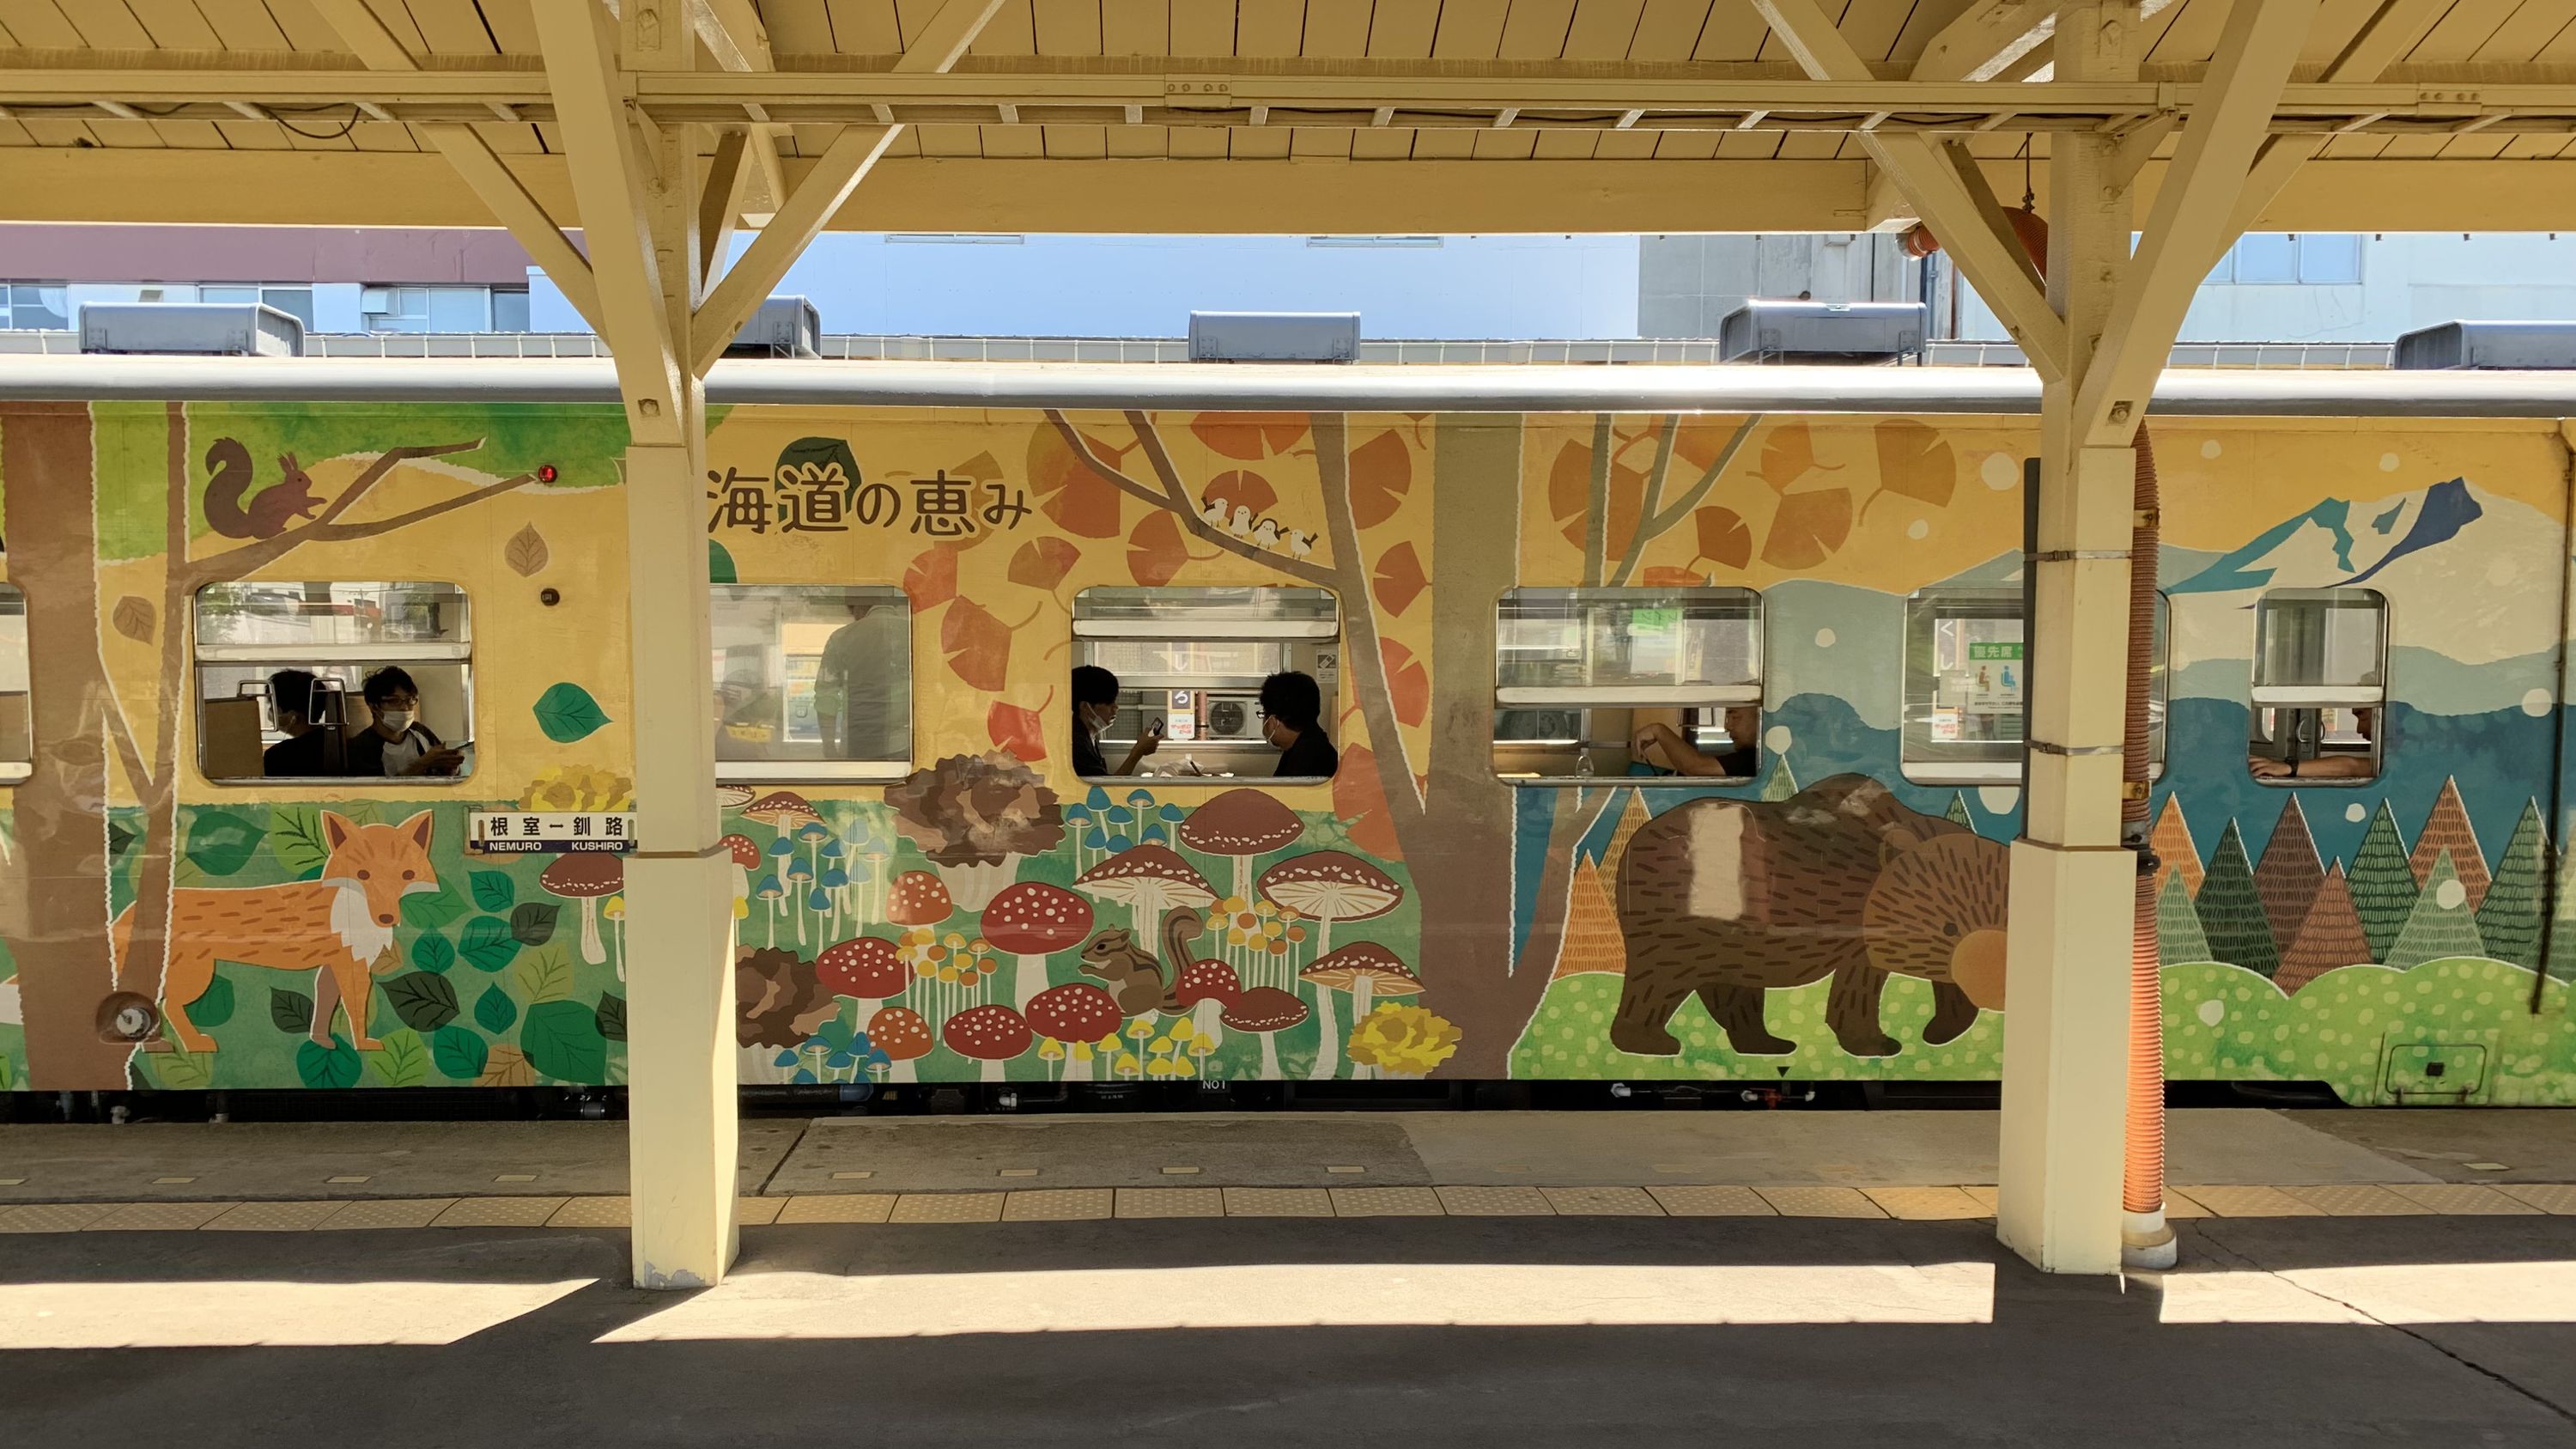 A yellow train decorated with forest animals.